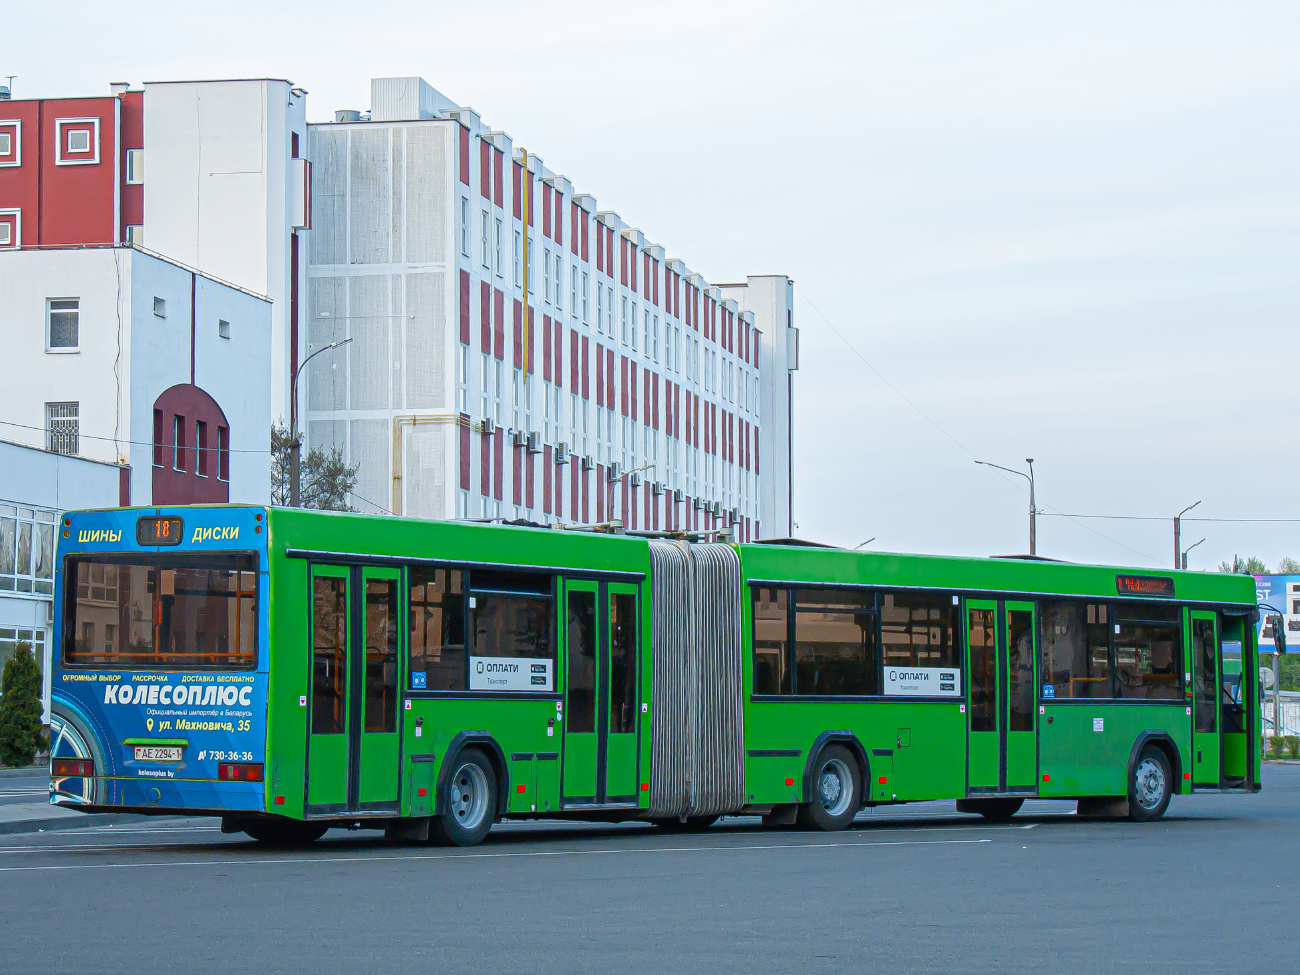 Brest, МАЗ-105.465 No. 134